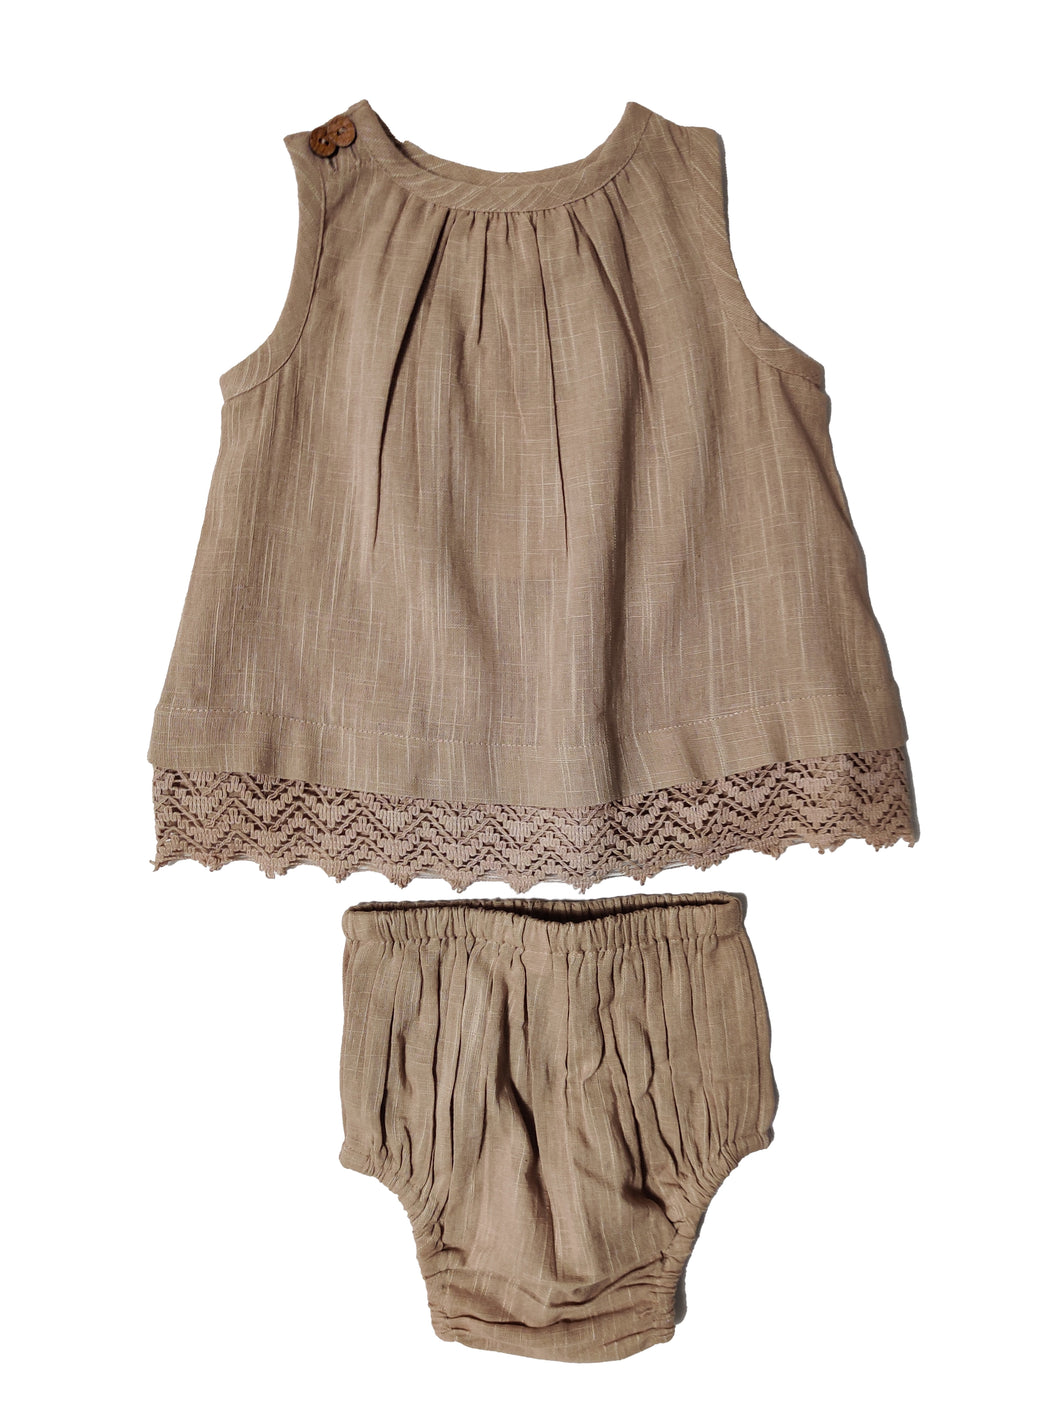 Oatmeal Tone on Tone Lace Detail Infant Shift Dress and Bloomer Set